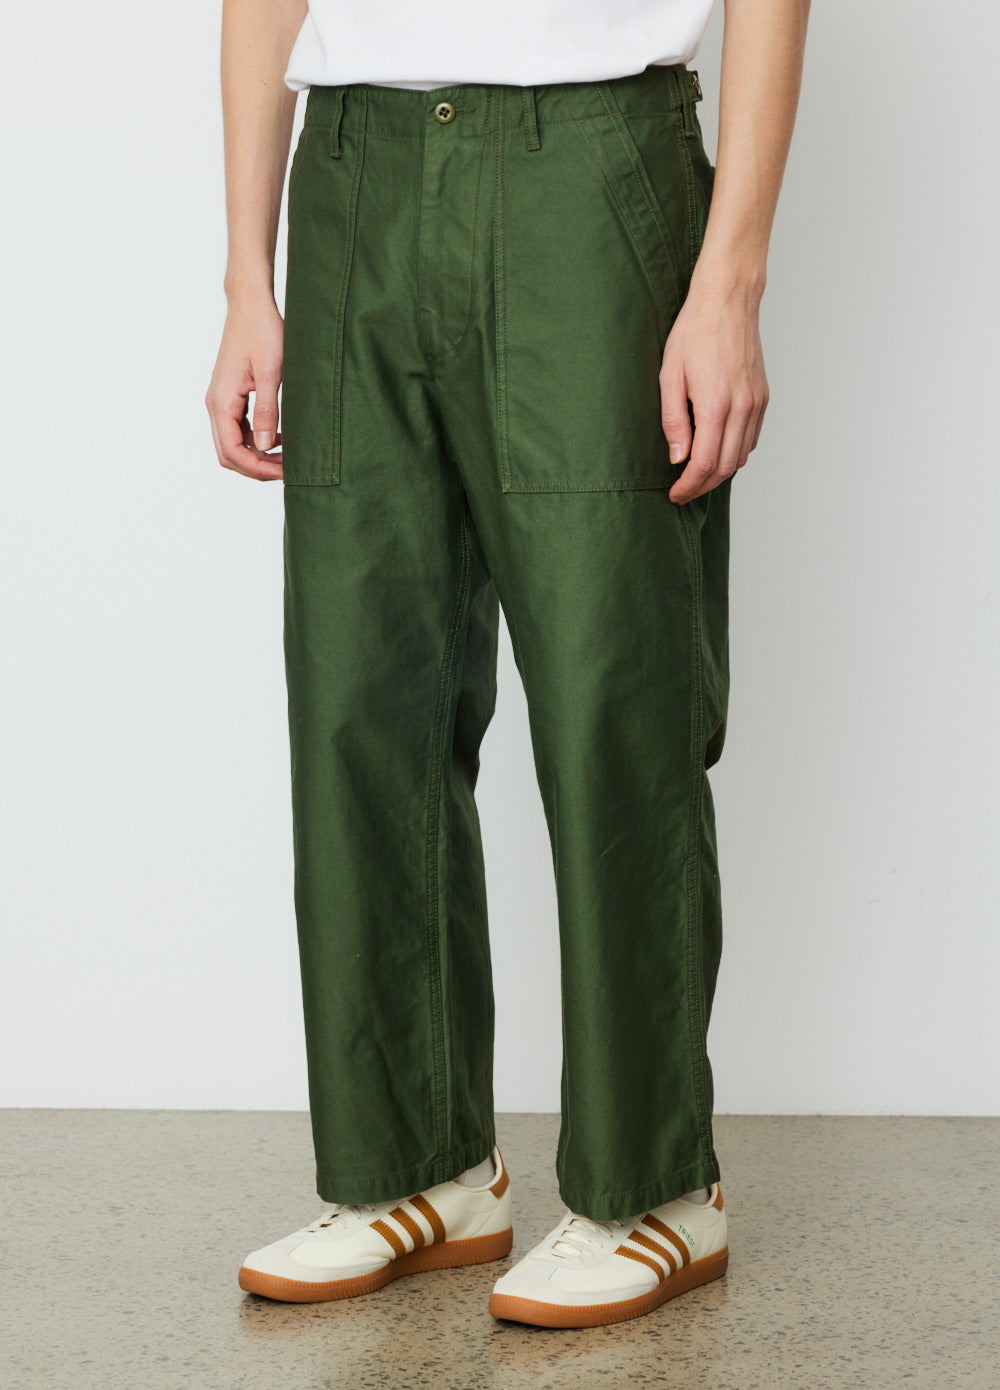 2 Pleat Twill Trouser - Olive | Beams Plus | Peggs & Son.